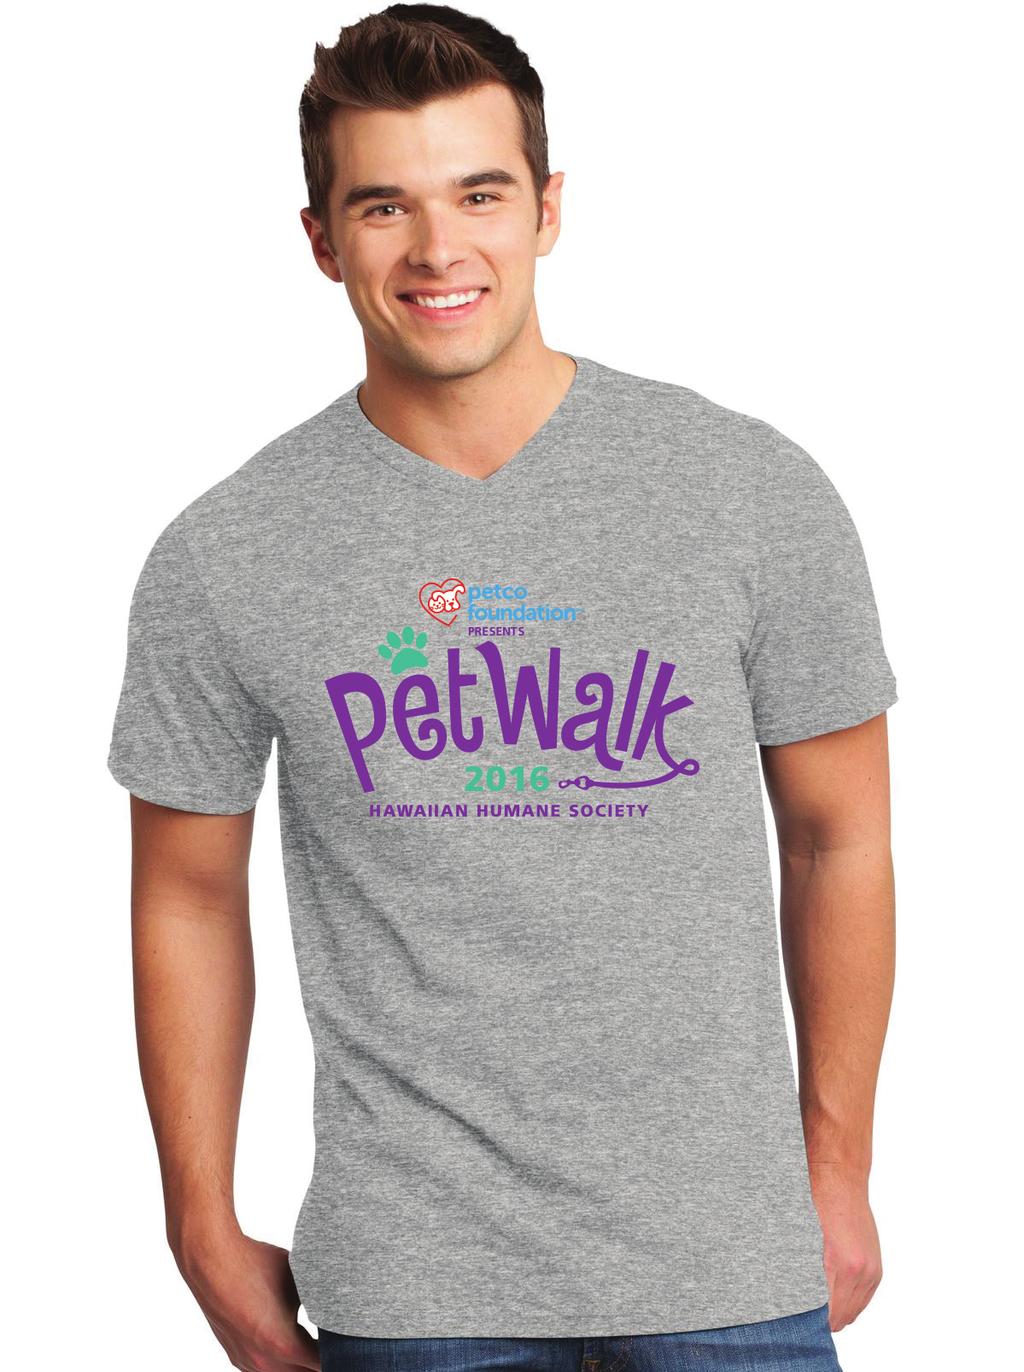 Custom Petwalk T-Shirts With Your Logo Rally a team of five or more and we will print your team name or company logo on the back.